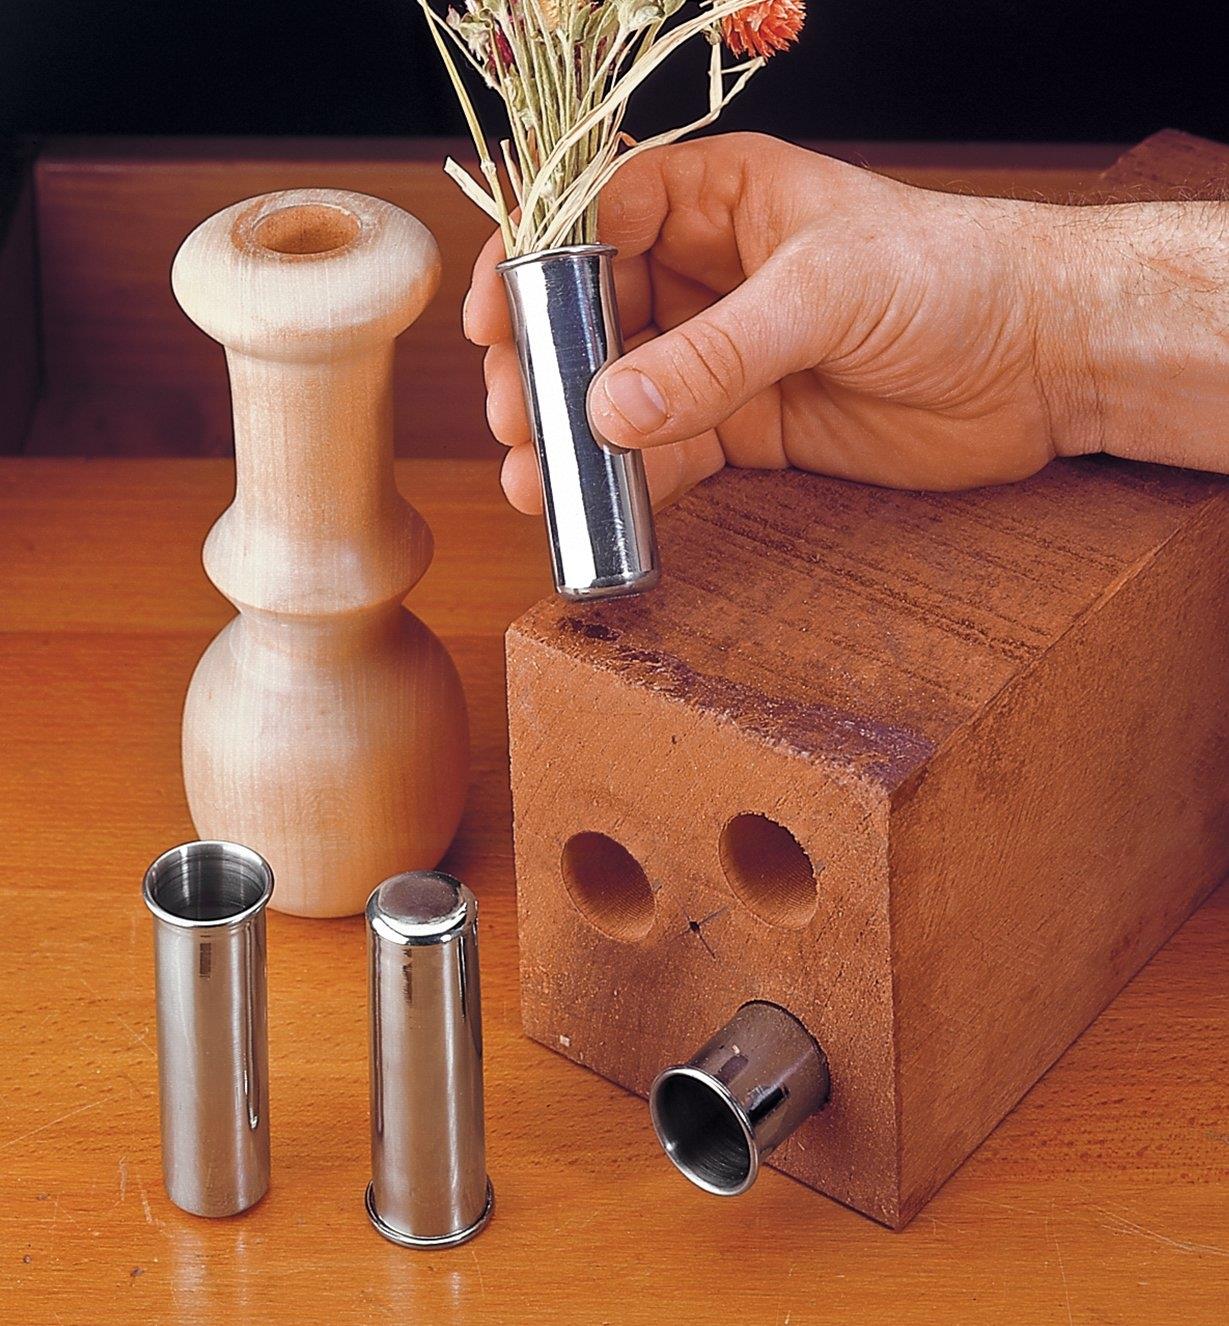 Stainless-Steel Inserts inserted into holes in a wooden block and in a candlestick